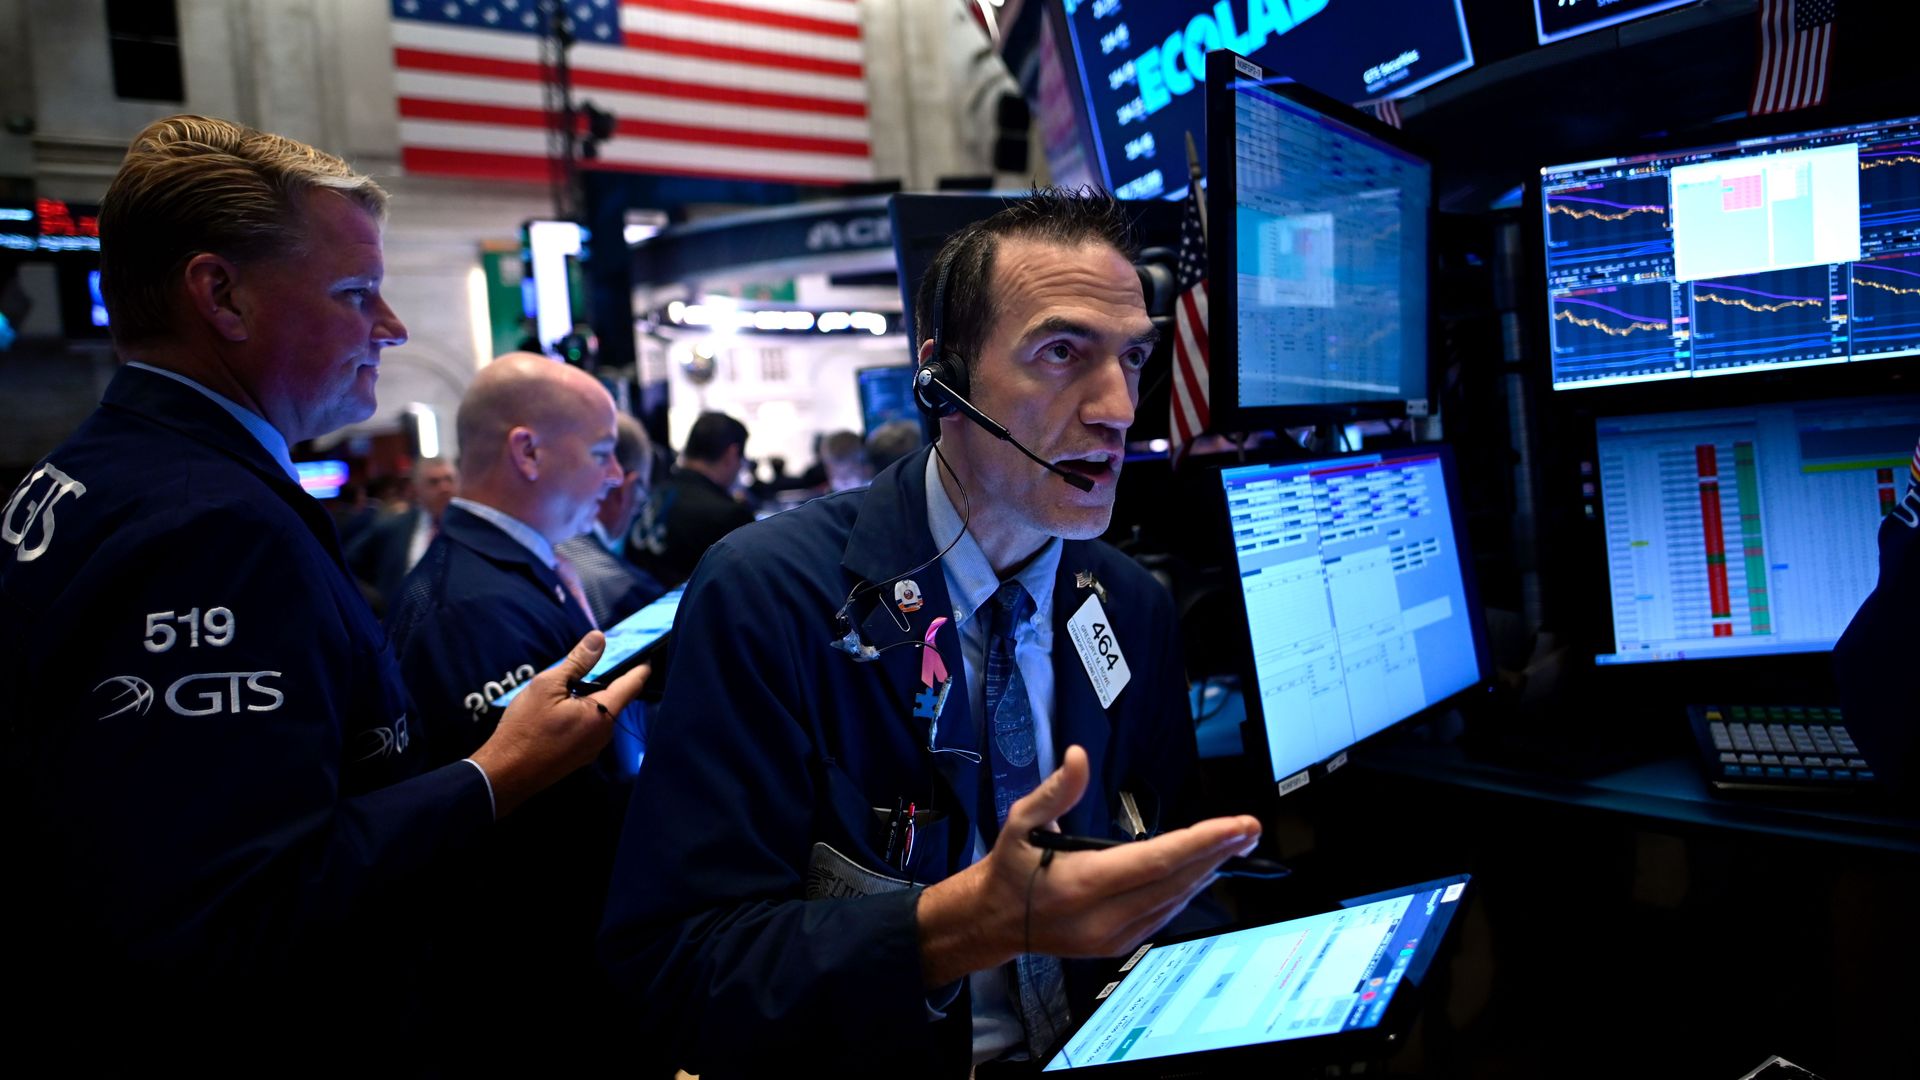  Traders work during the opening bell at the New York Stock Exchange (NYSE) on October 2